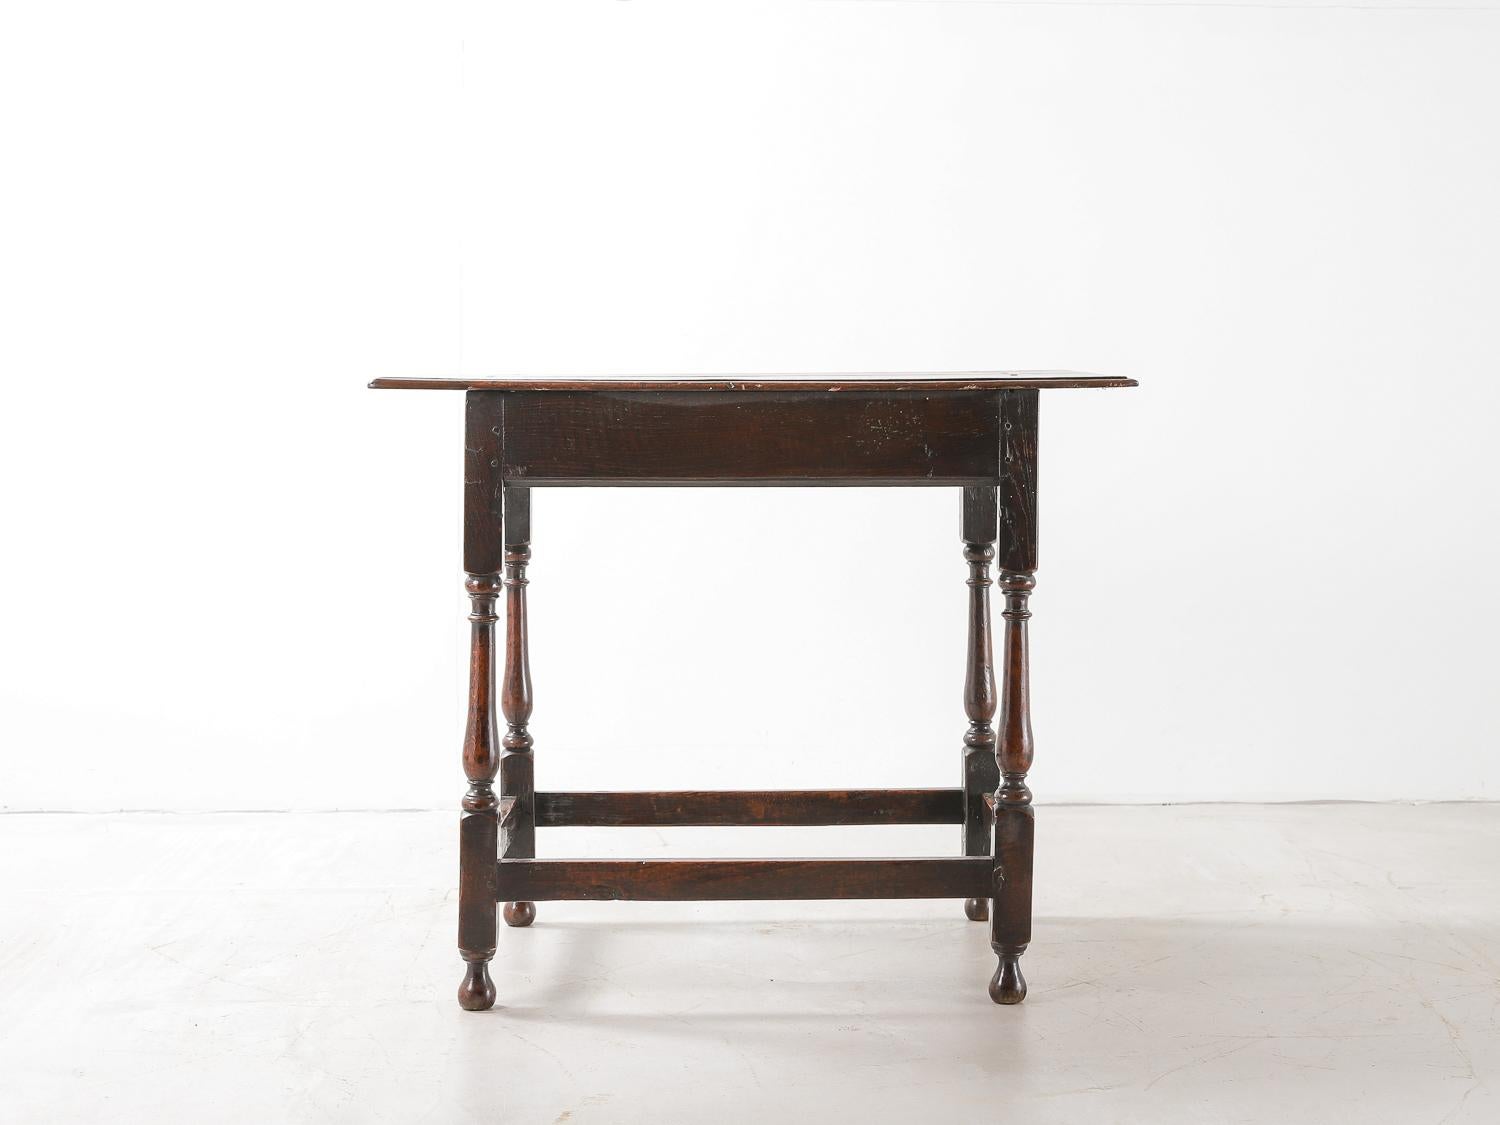 Early 18th century oak centre table with turned legs. Lovely aging and patina.